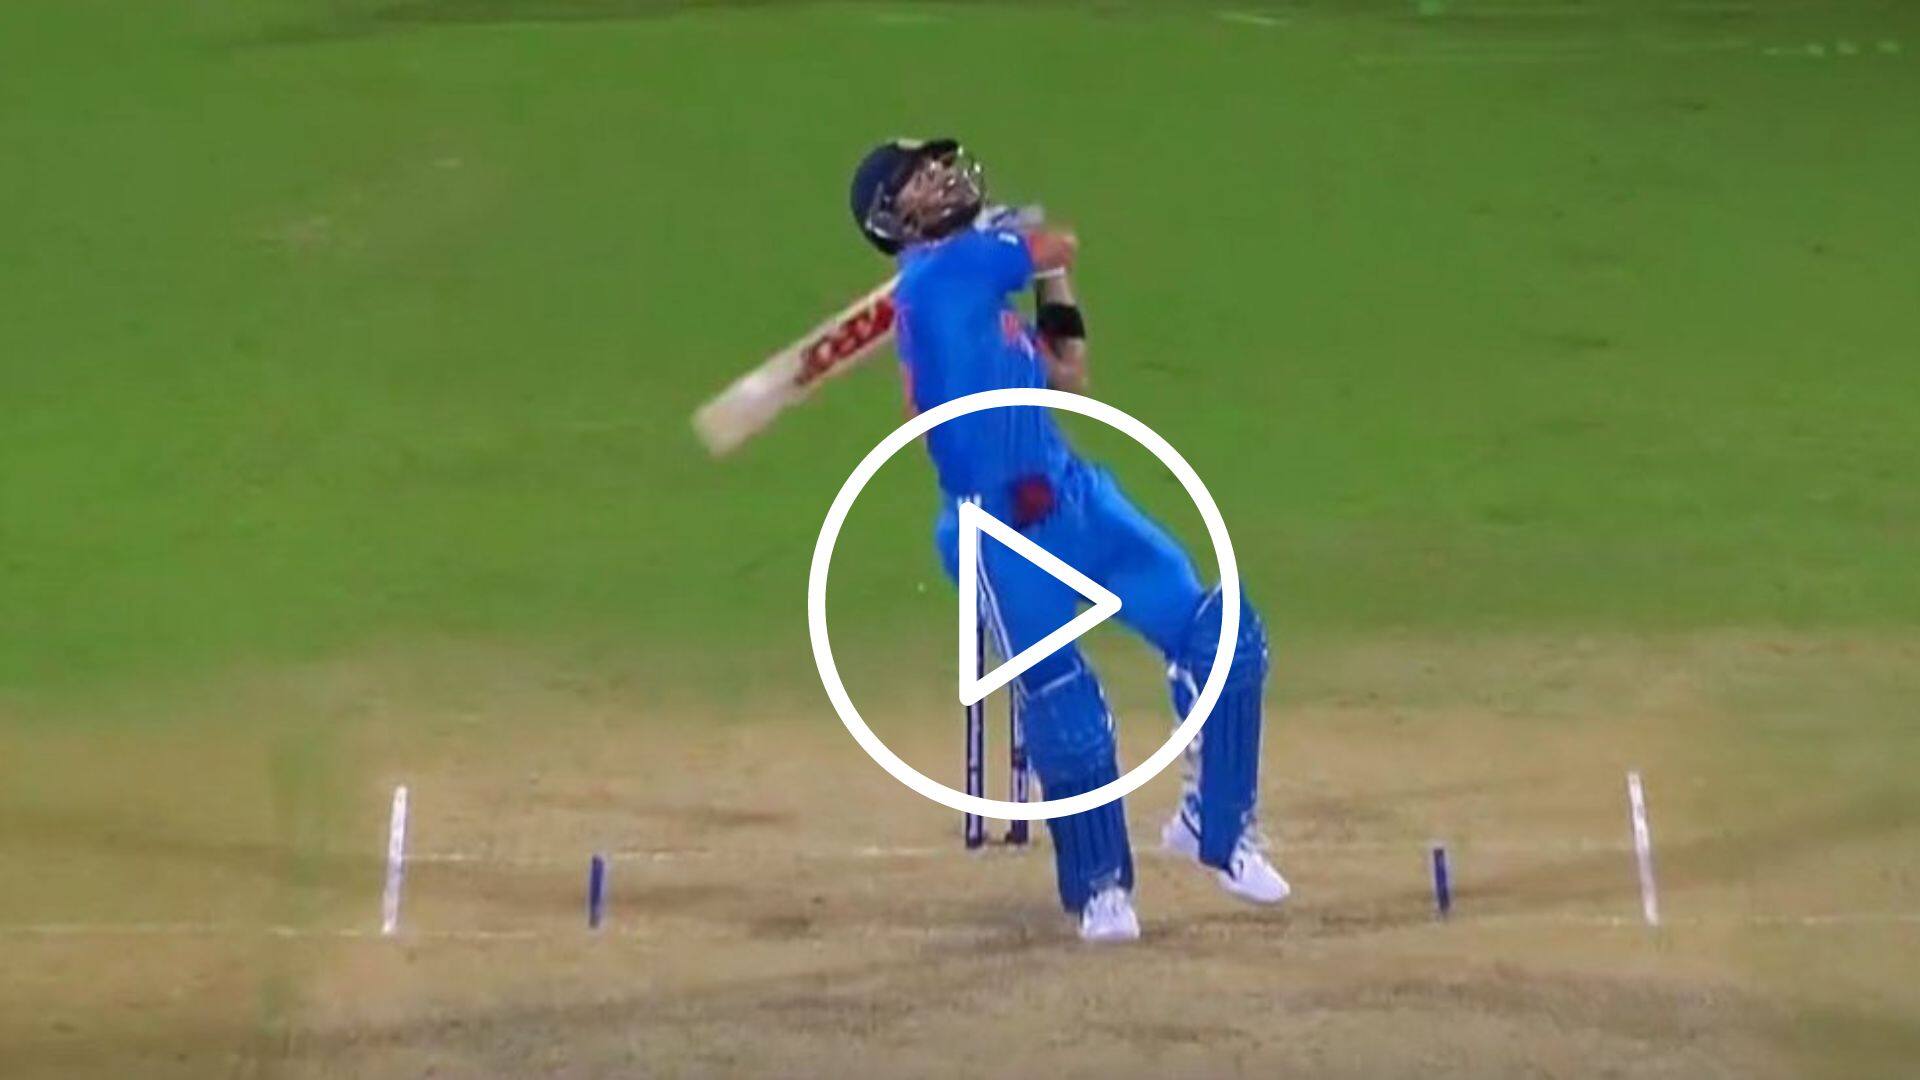 [Watch] Mitchell Marsh Makes A 'Big Blunder' As Virat Kohli Gets Dropped On Deadly Bouncer